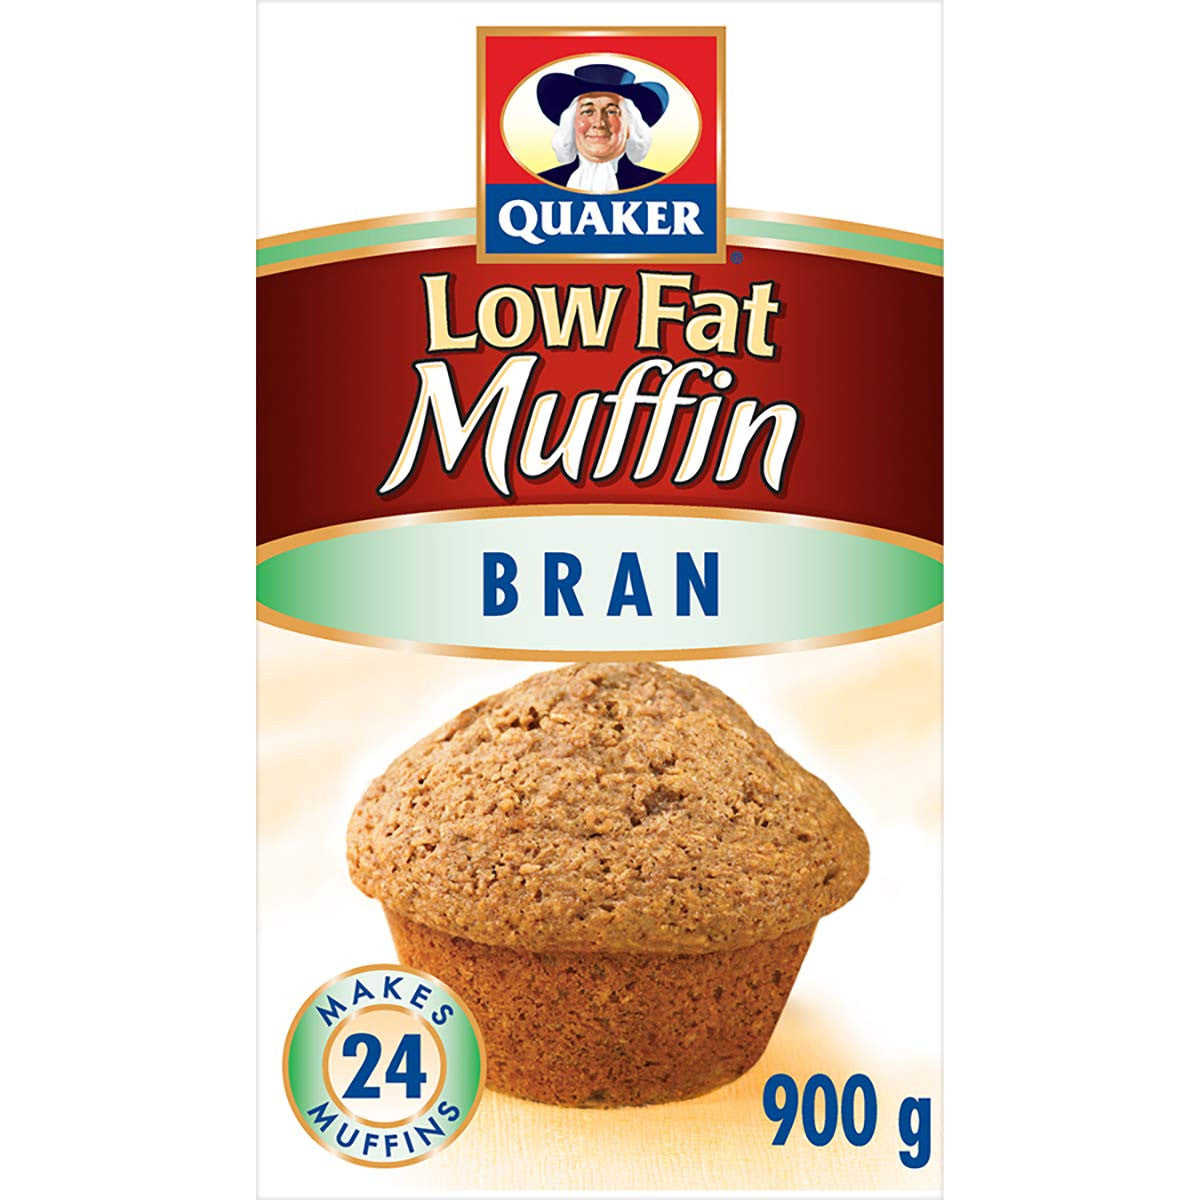 Quaker Muffin Mix Low Fat Bran, 12ct, 900g, Imported from Canada